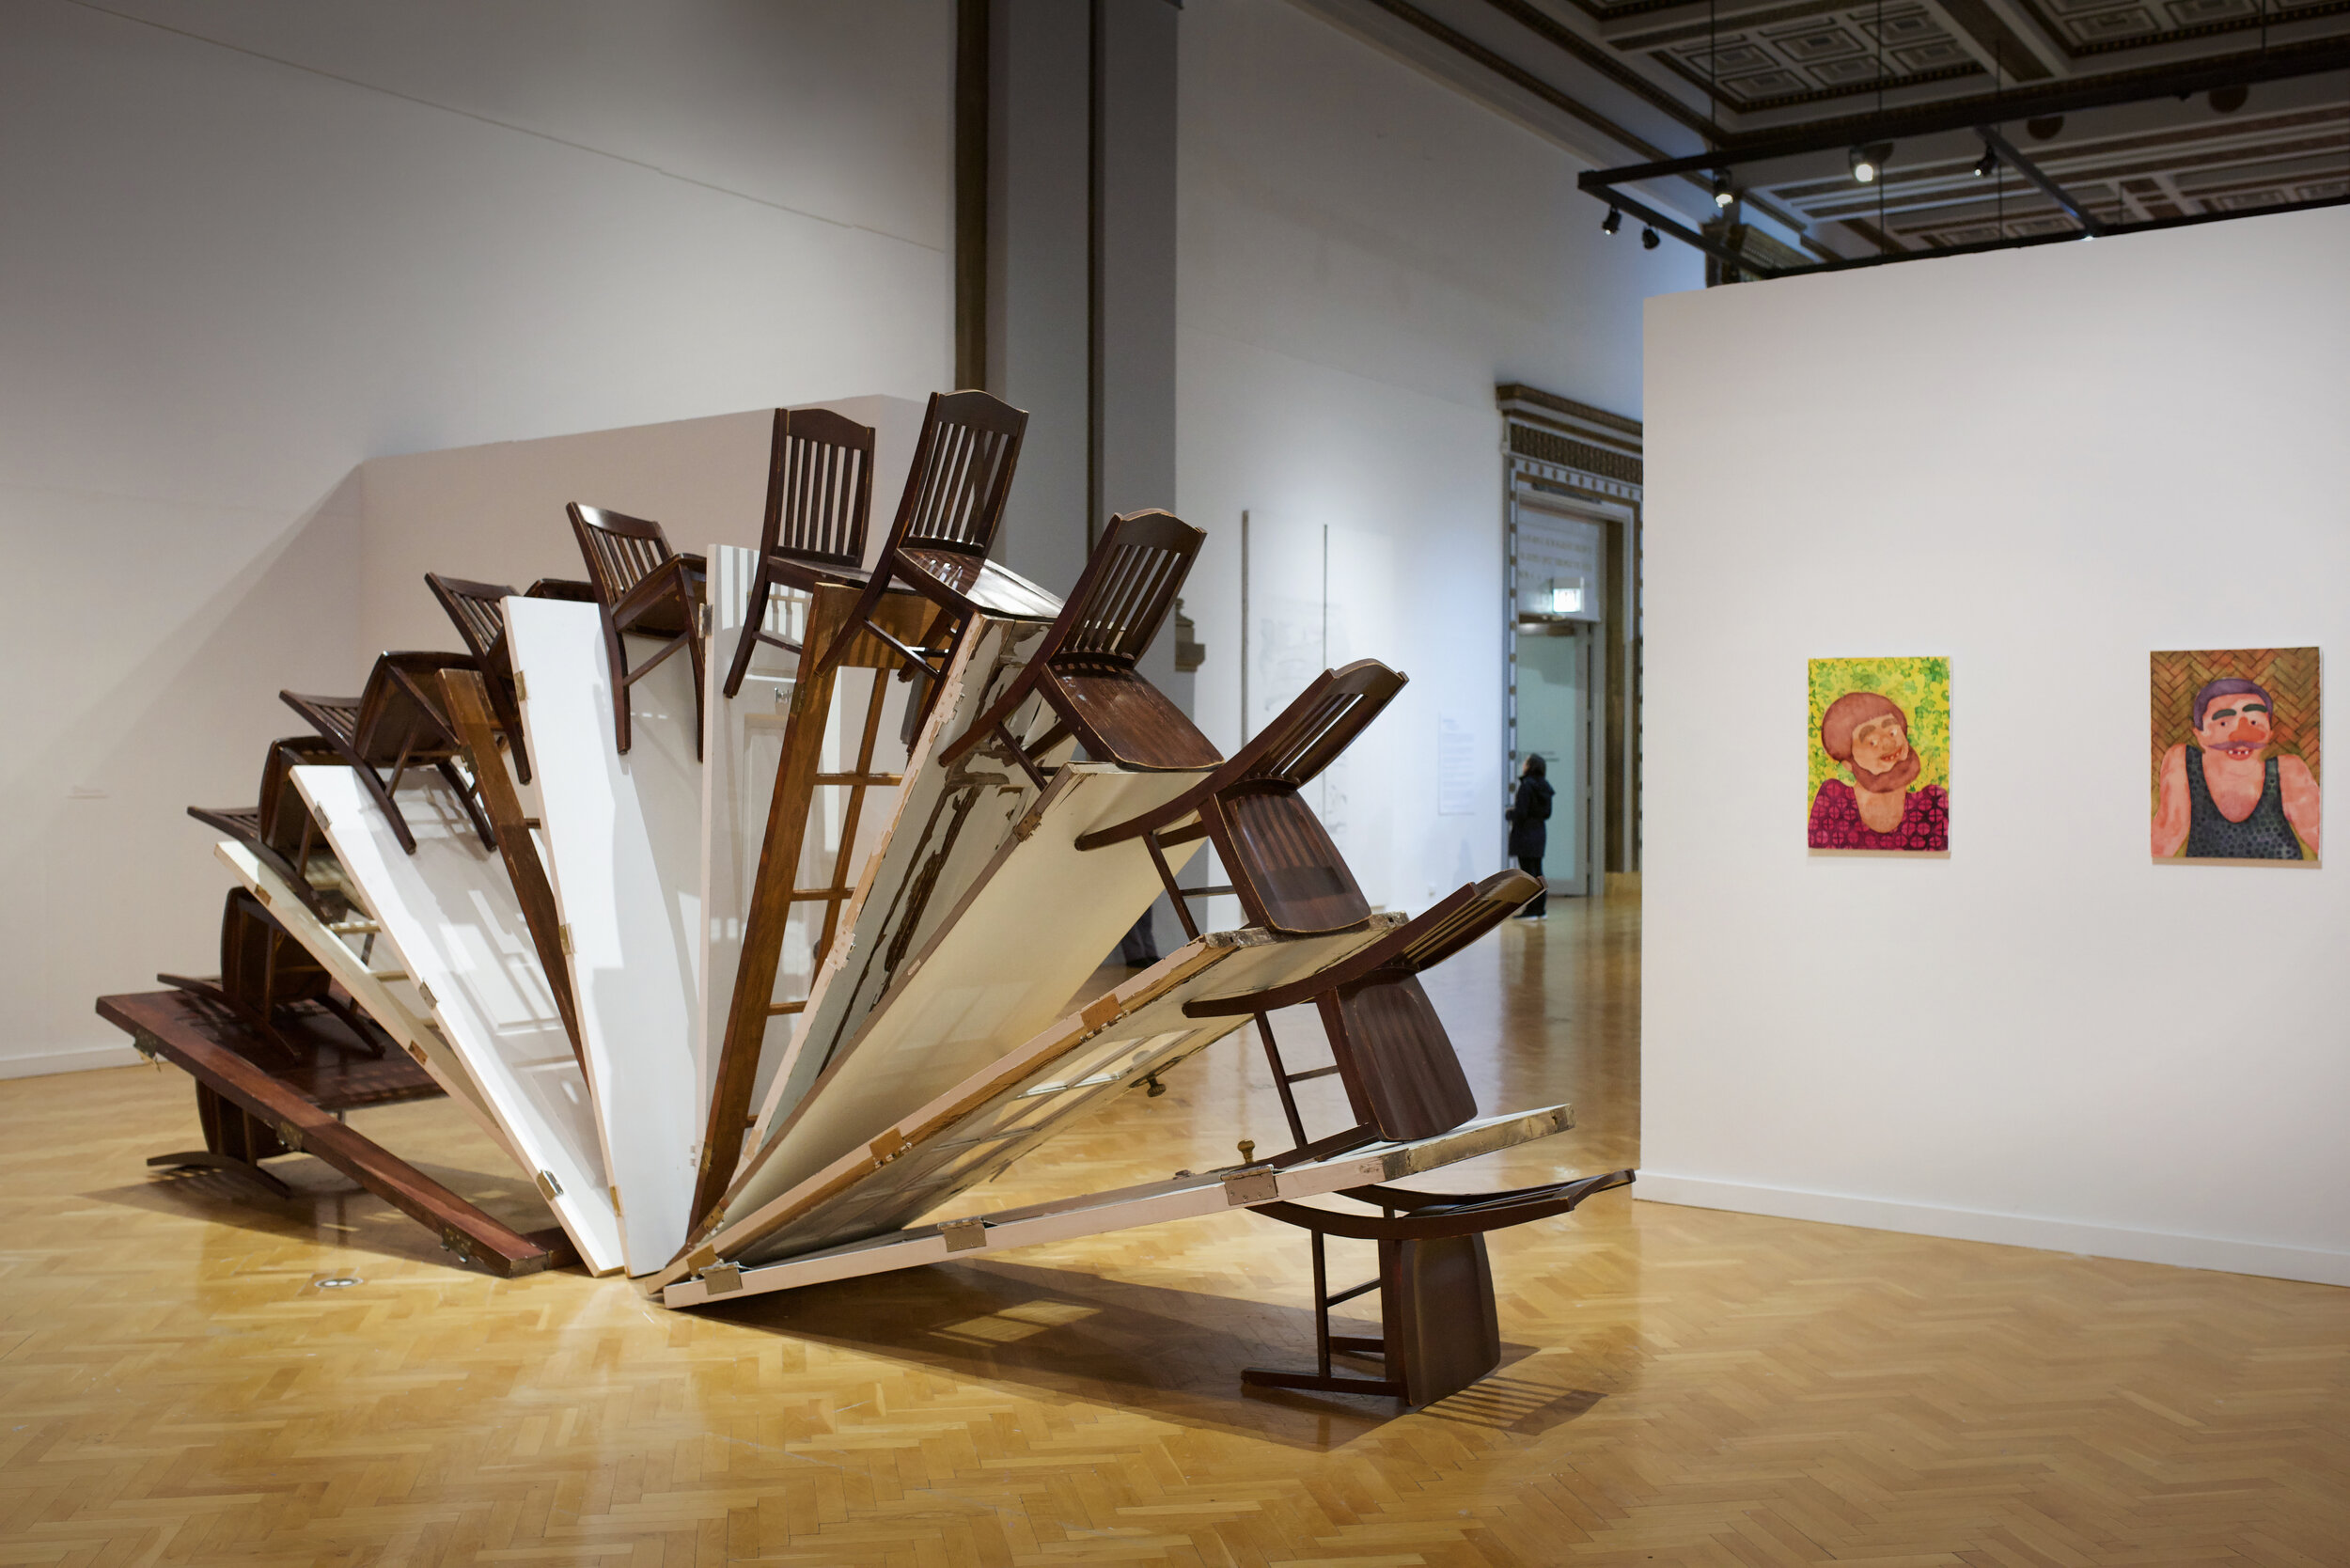  Installation view of work, left to right: Alberto Aguilar, Orkideh Torabi – photo by Gloria Arroyo. 